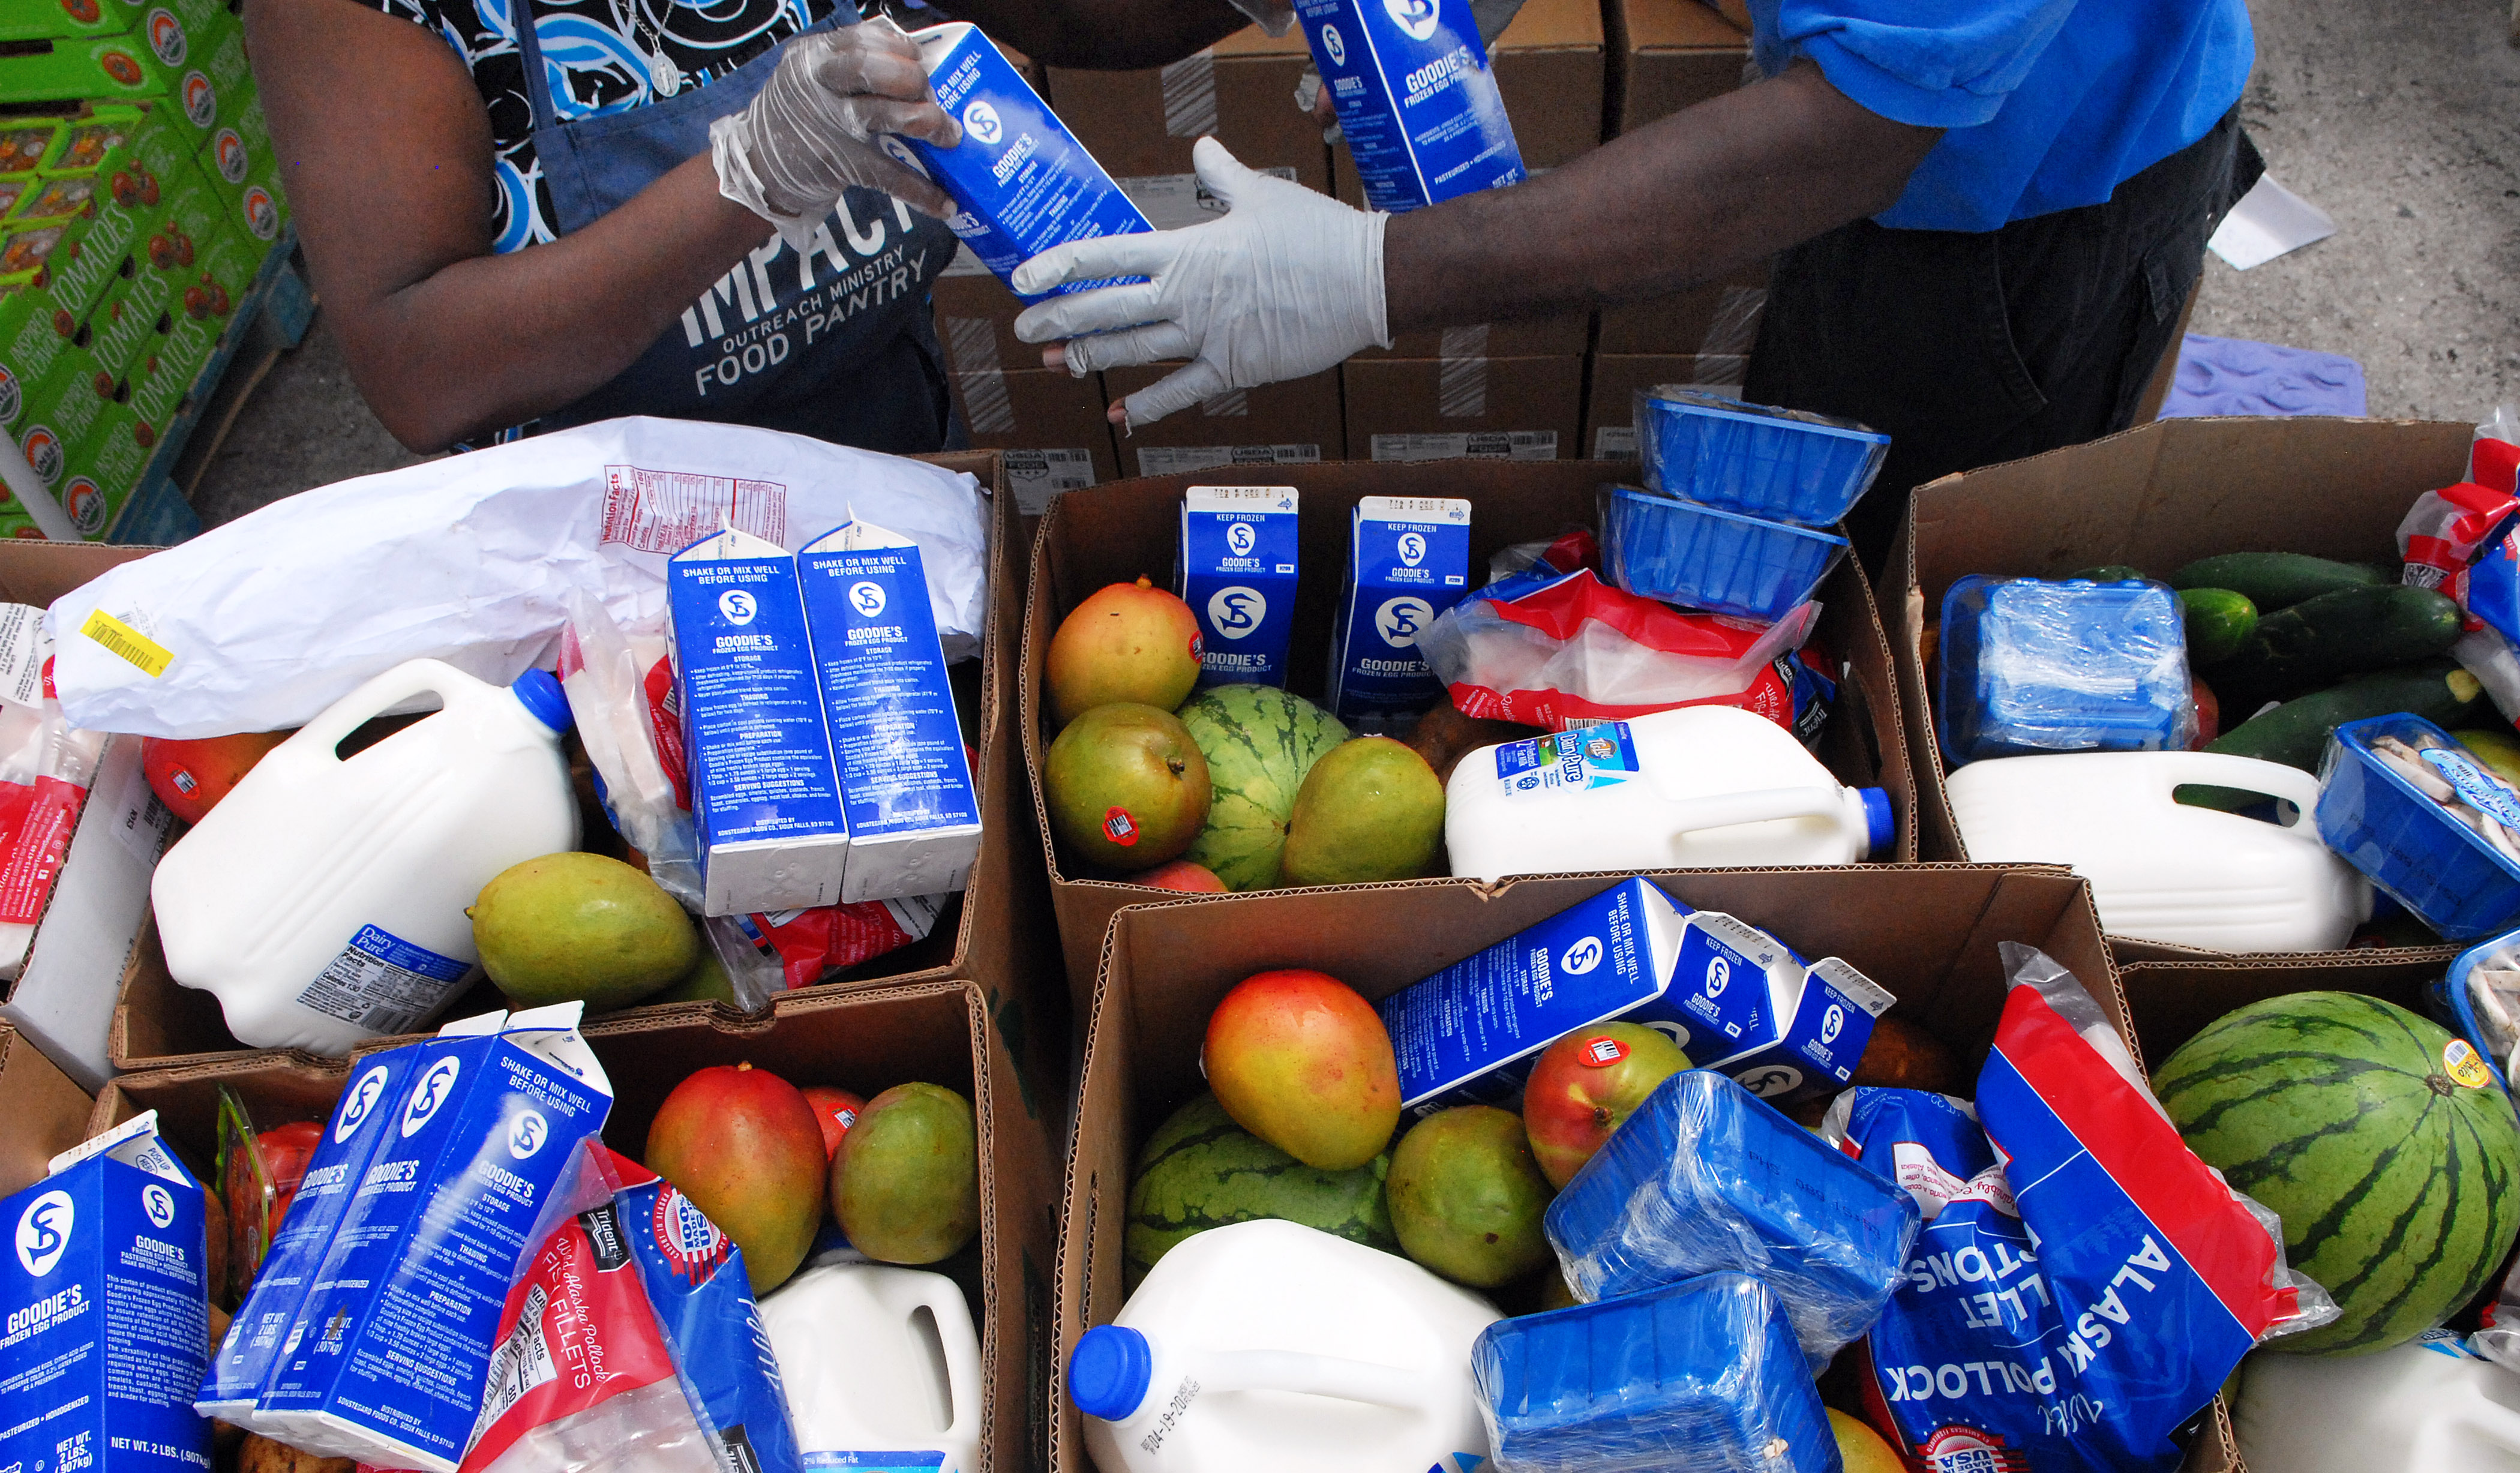 Workers fill boxes of food from the Second Harvest Food Bank of Central Florida to be distributed to needy families on April 6, 2020 in Orlando, Florida. (Paul Hennessy—NurPhoto/Getty Images)